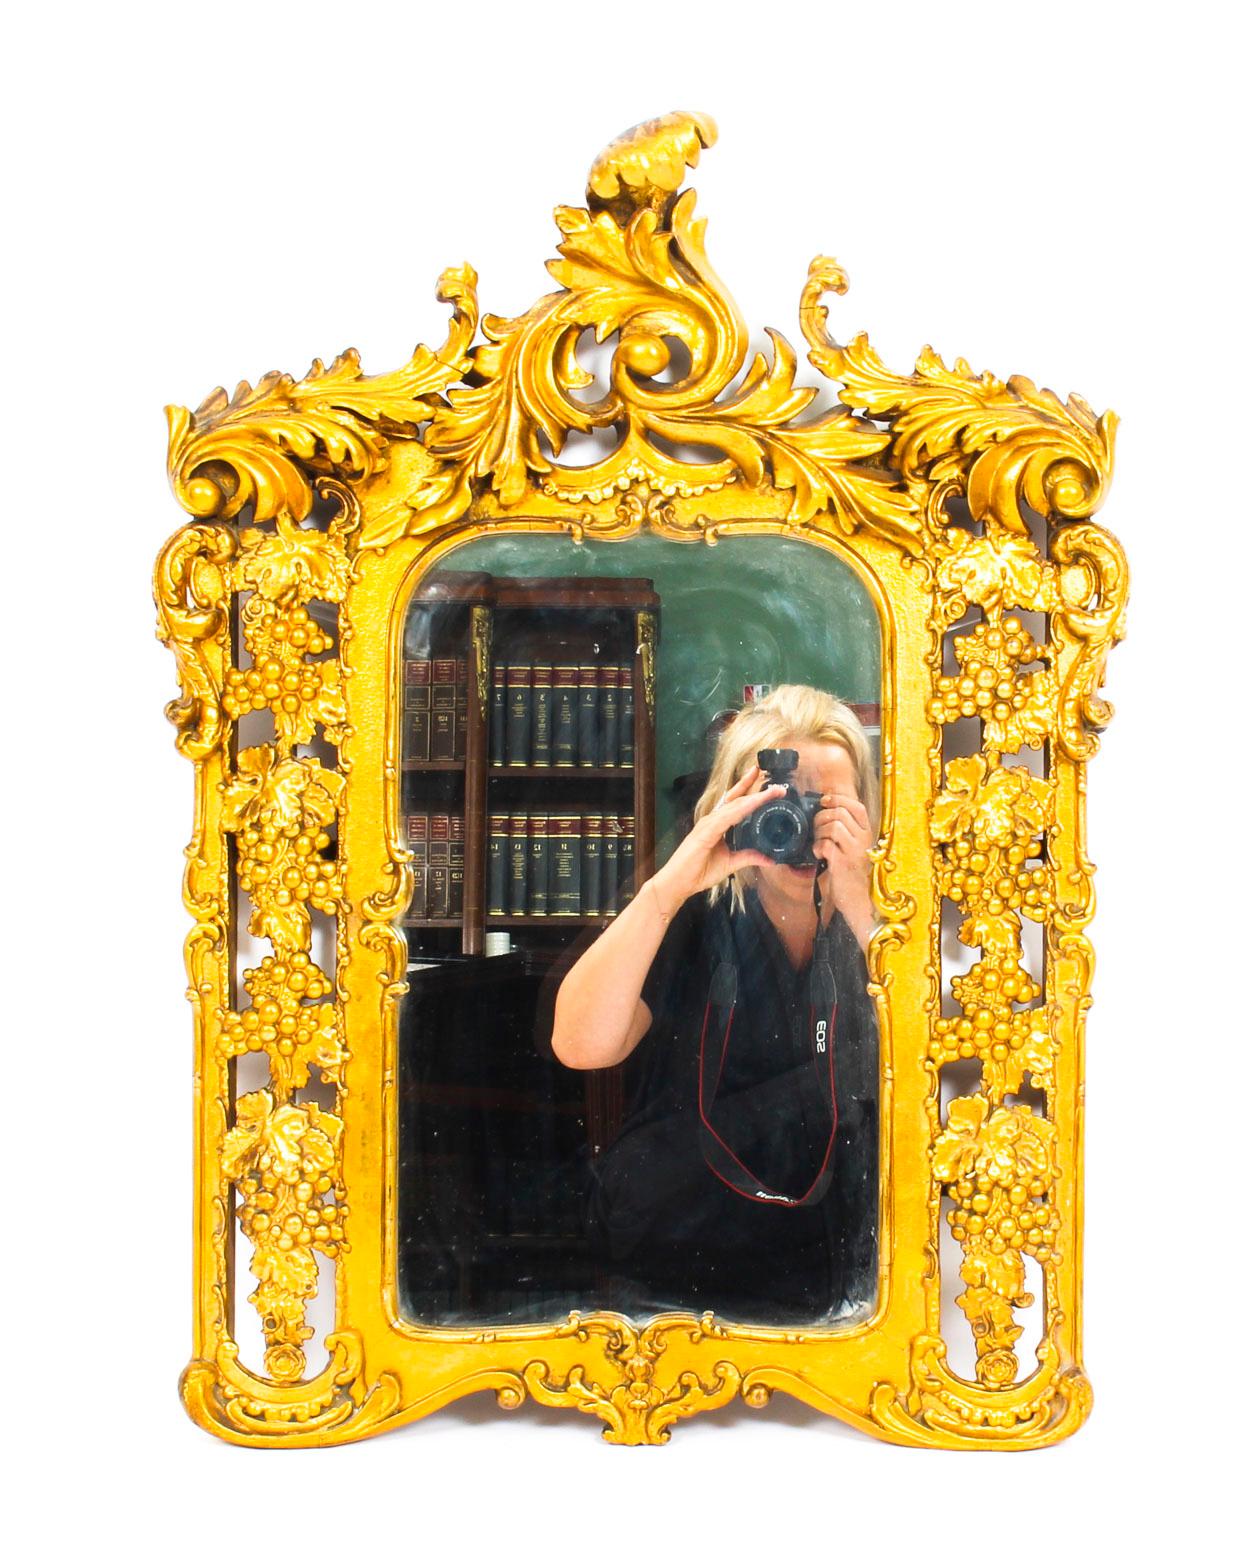 This is a truly spectacular antique Italian giltwood framed mirror, circa 1860 in date. Measures: 78 x 56cm.
 
The bevelled rectangular mirror plate has a superbly carved giltwood frame decorated with splendid bold leaf scroll decoration and